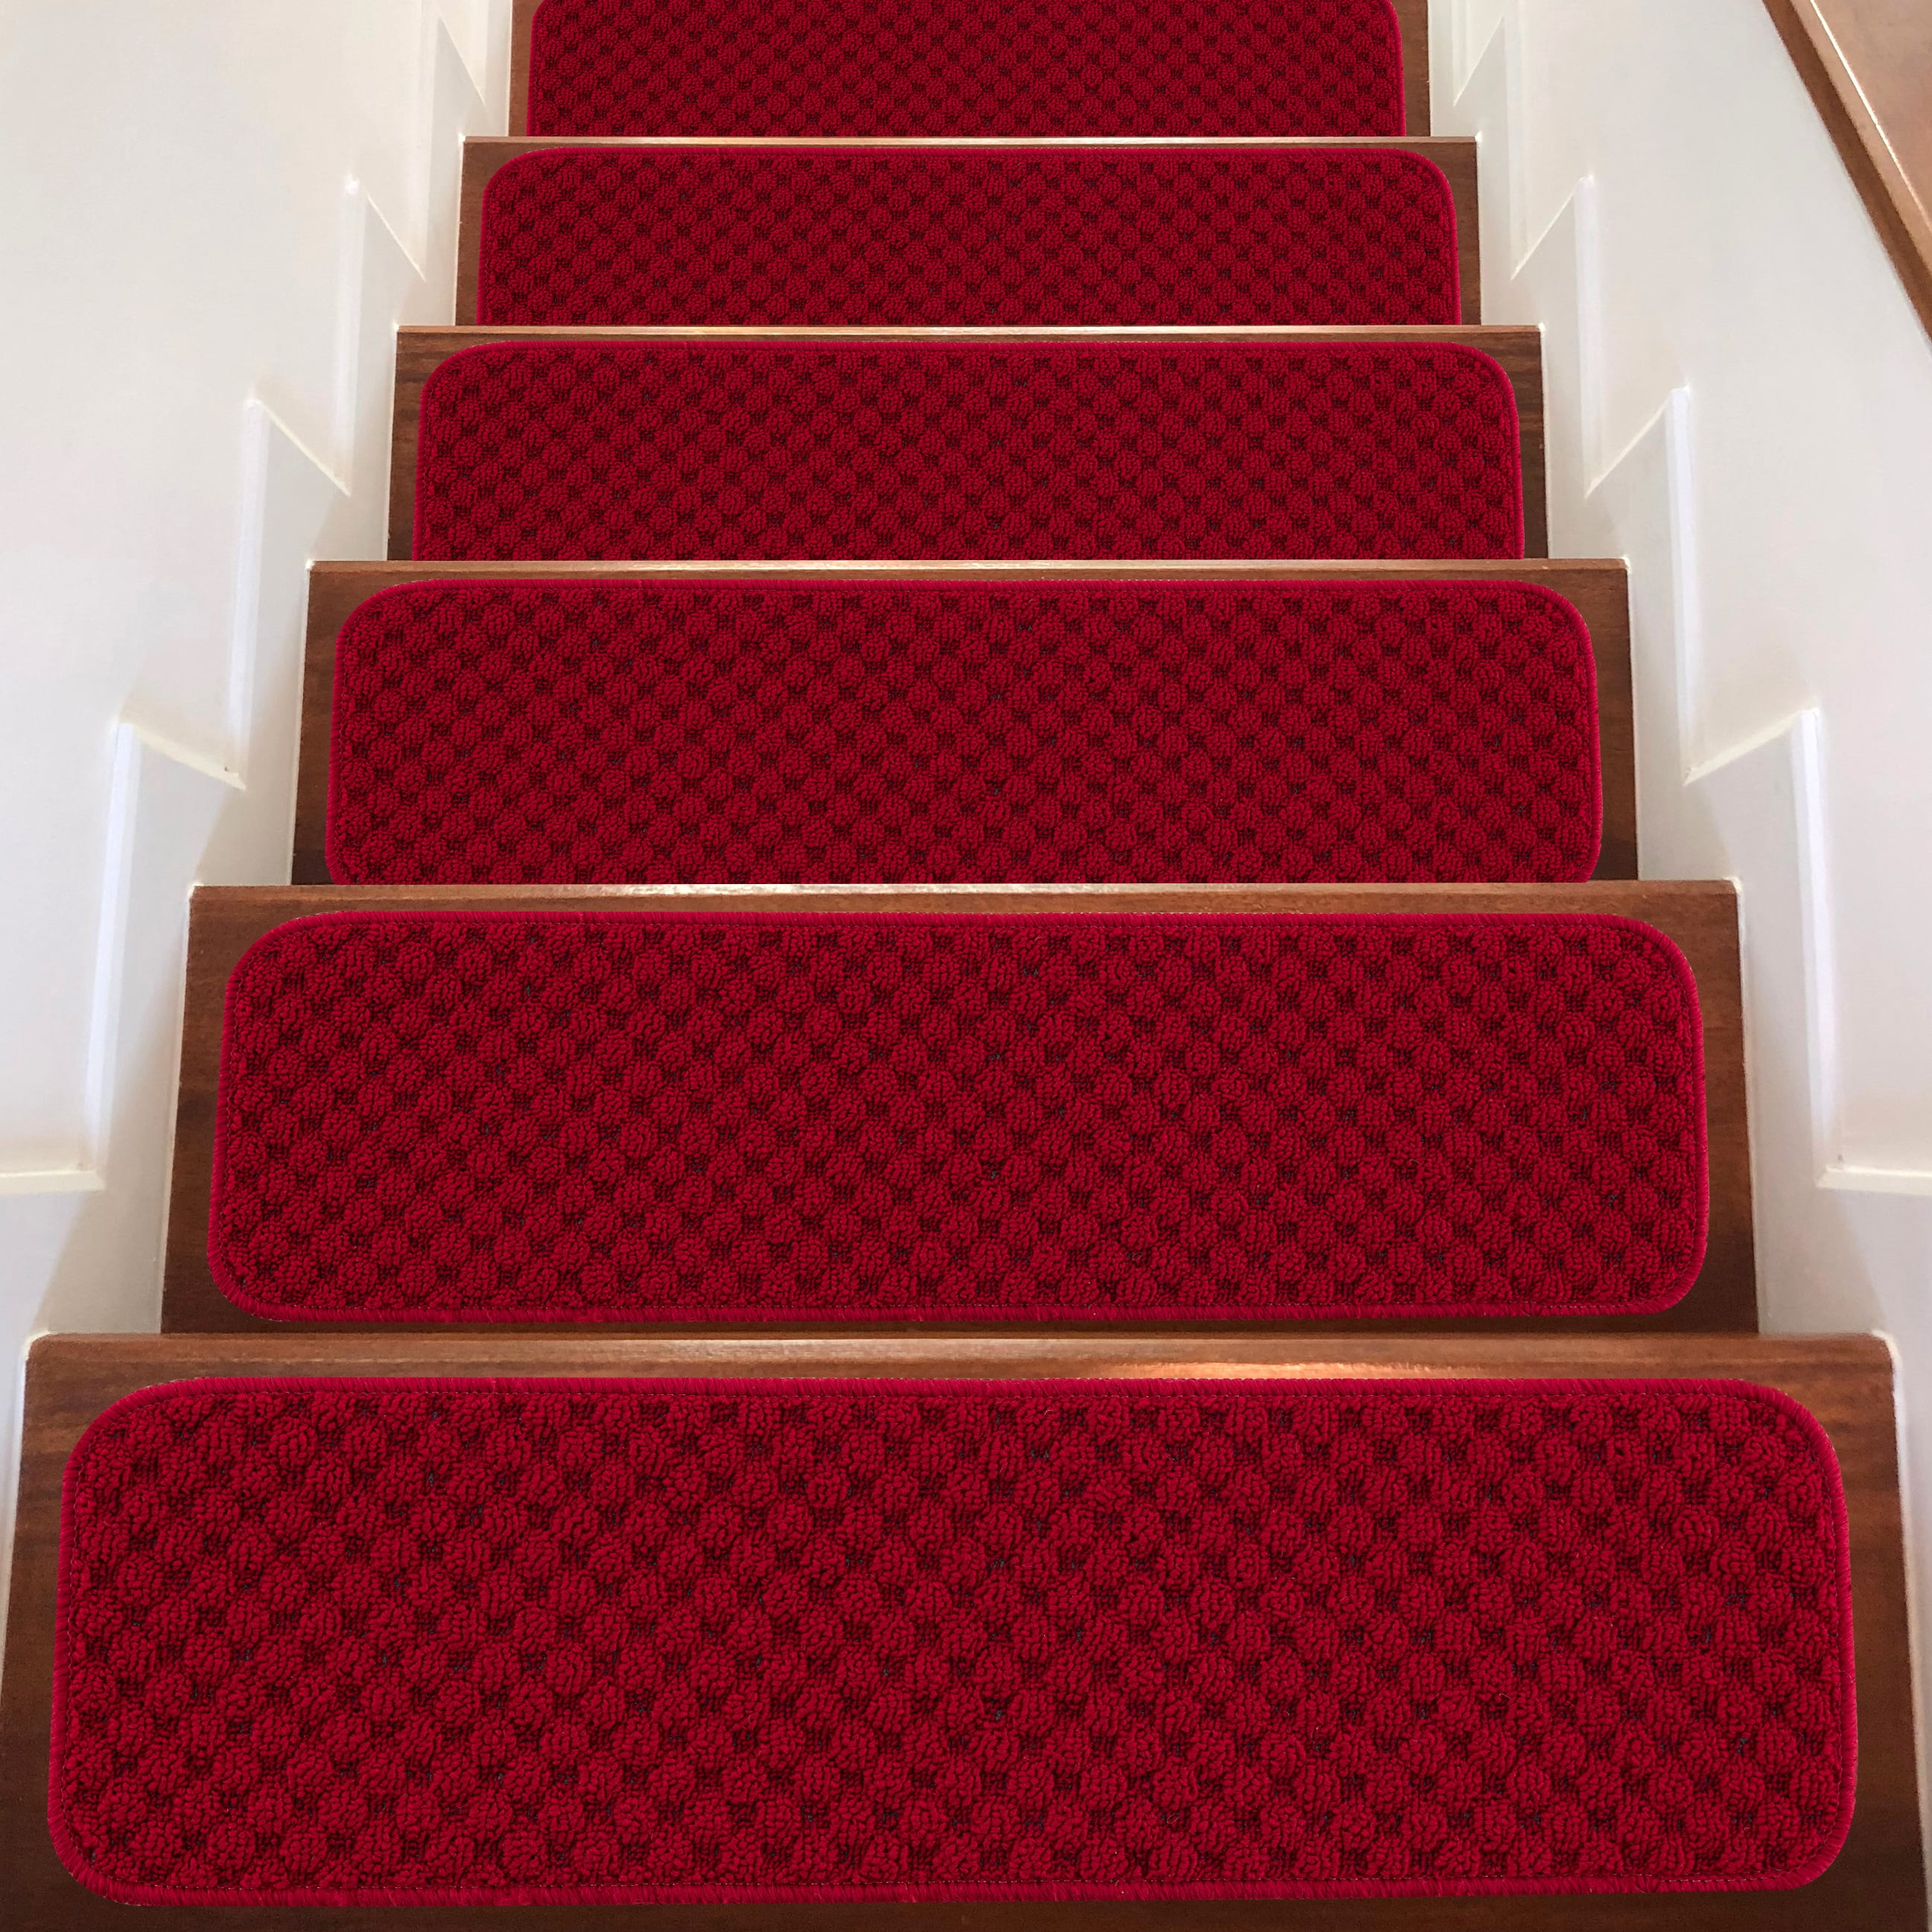 Stair Treads Non-Slip Rubber Back Quality Stair Mats 7 PIECES SET FREE SHIPPING 